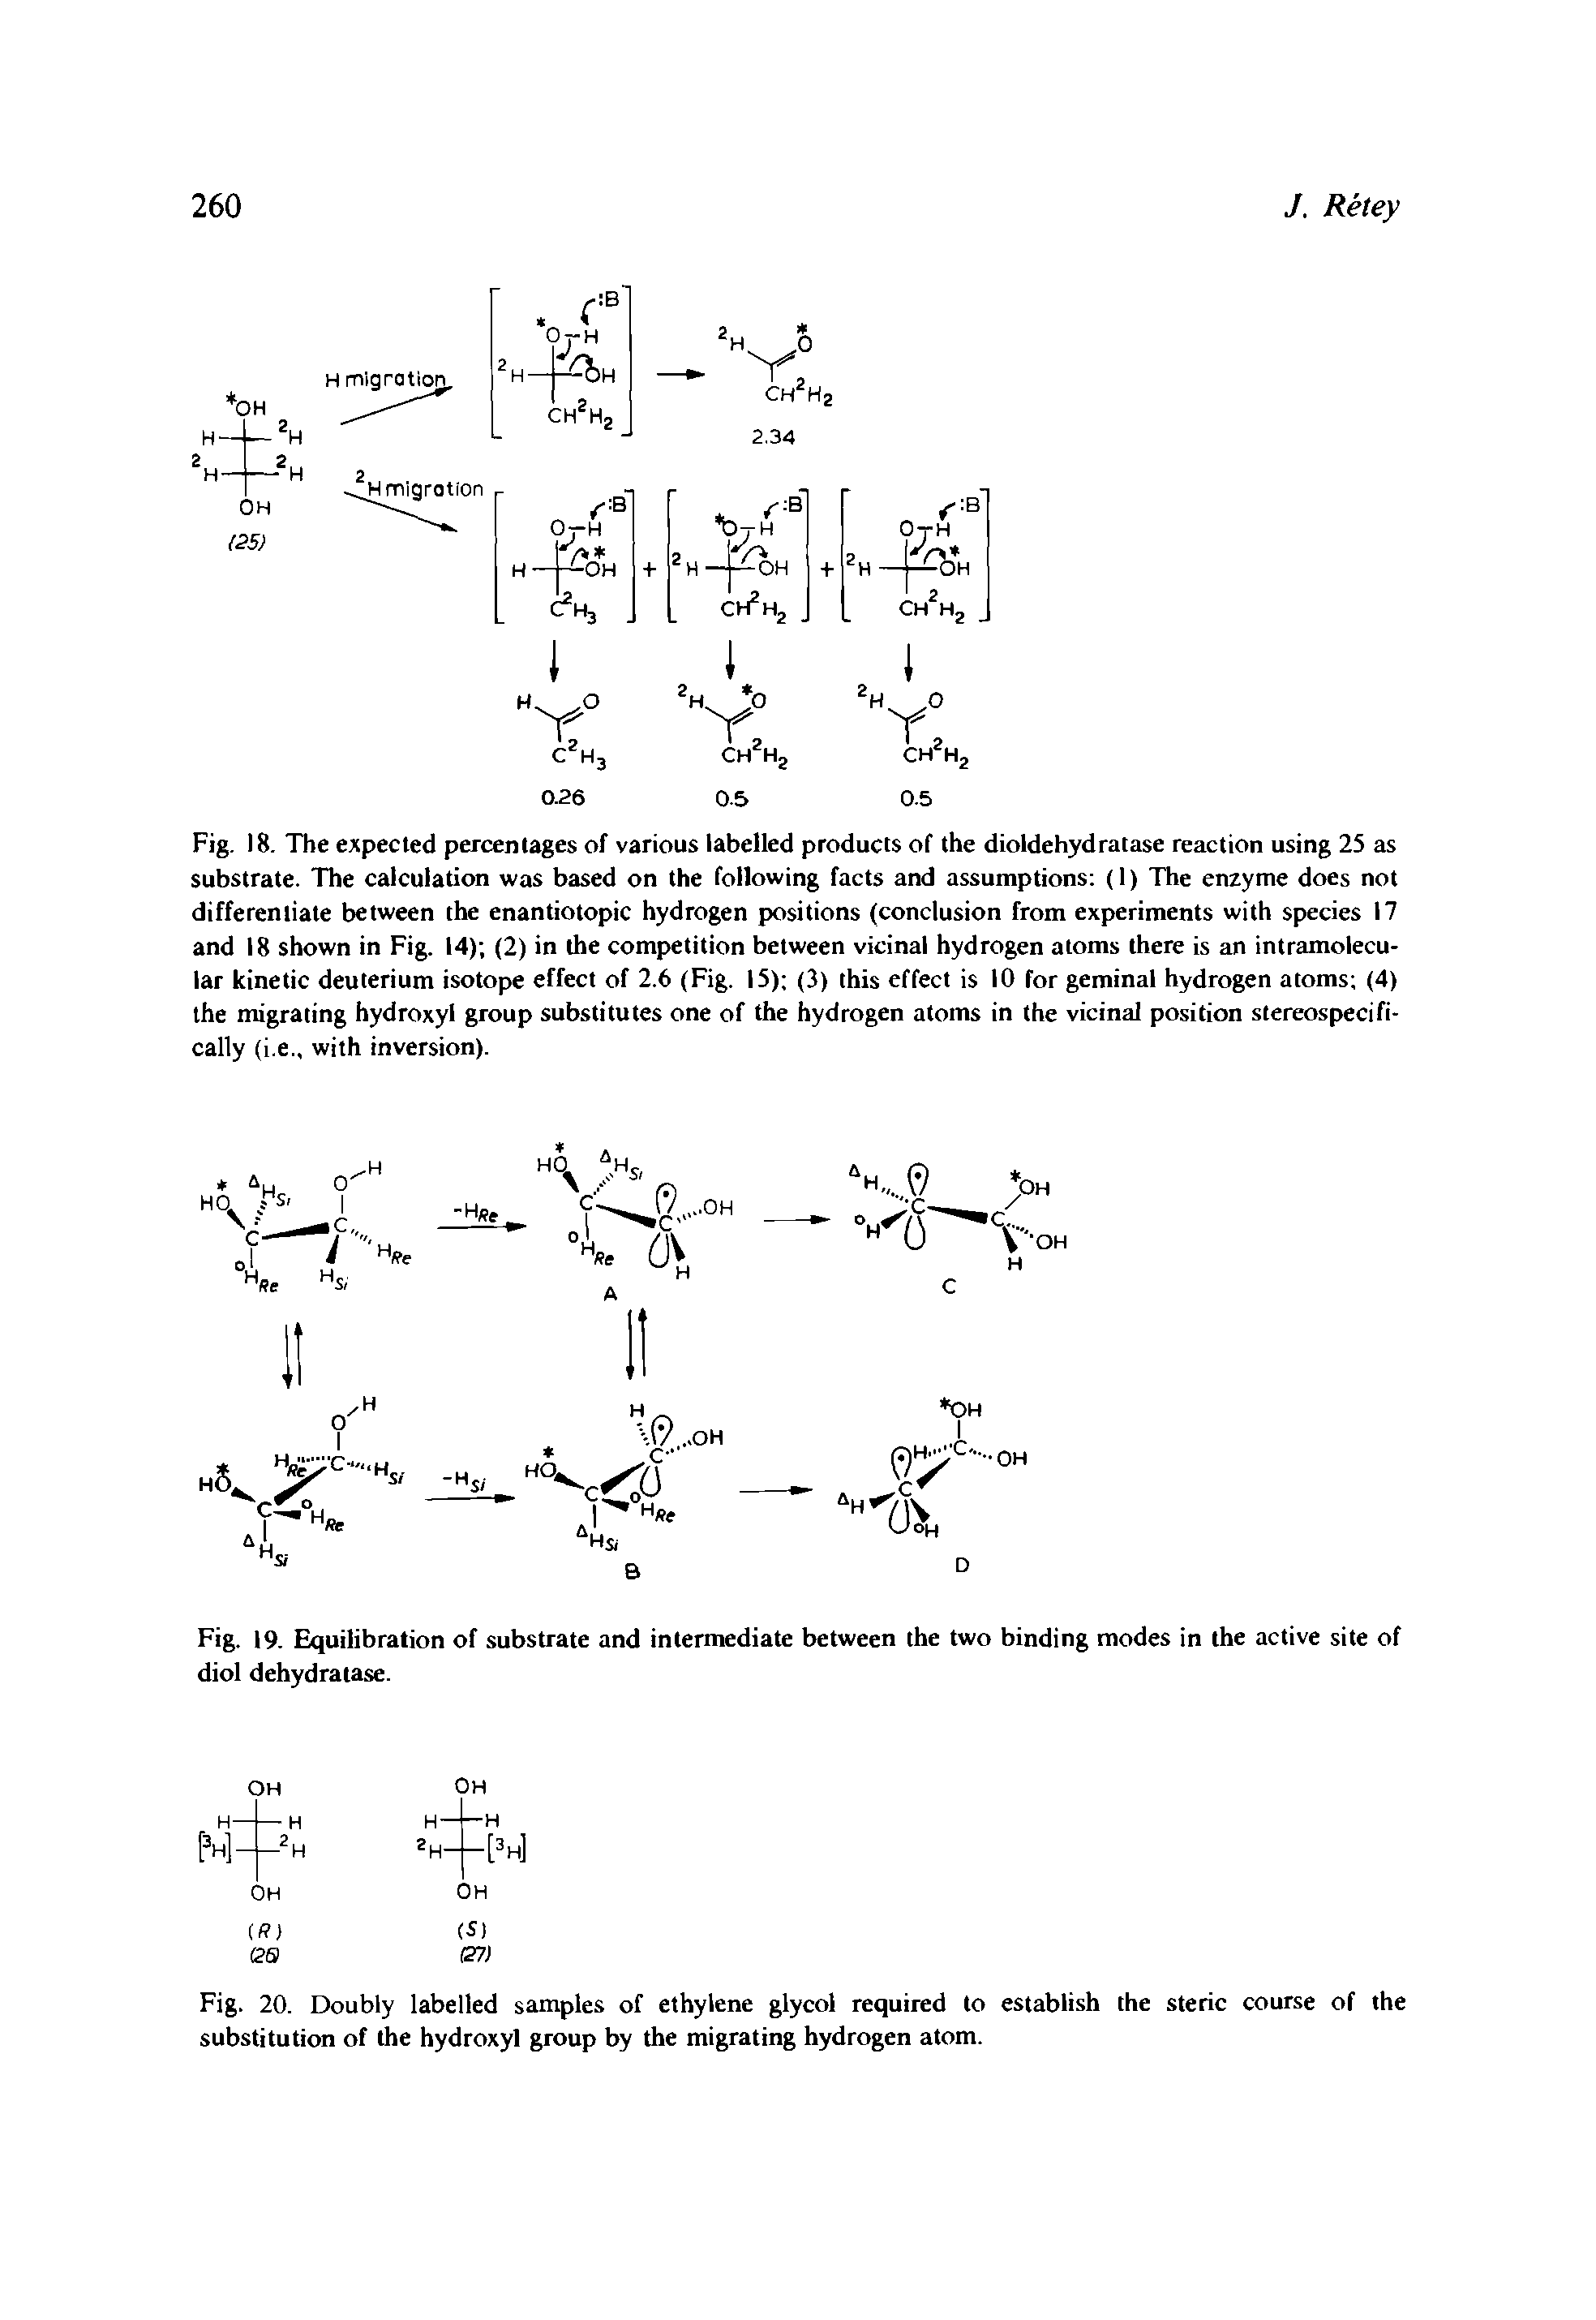 Fig. 18. The expected percentages of various labelled products of the dioldehydratase reaction using 25 as substrate. The calculation was based on the following facts and assumptions (1) The enzyme does not differentiate between the enantiotopic hydrogen positions (conclusion from experiments with species 17 and 18 shown in Fig. 14) (2) in the competition between vicinal hydrogen atoms there is an intramolecular kinetic deuterium isotope effect of 2.6 (Fig. 15) (3) this effect is 10 for geminal hydrogen atoms (4) the migrating hydroxyl group substitutes one of the hydrogen atoms in the vicinal position stereospecifi-cally (i.e., with inversion).